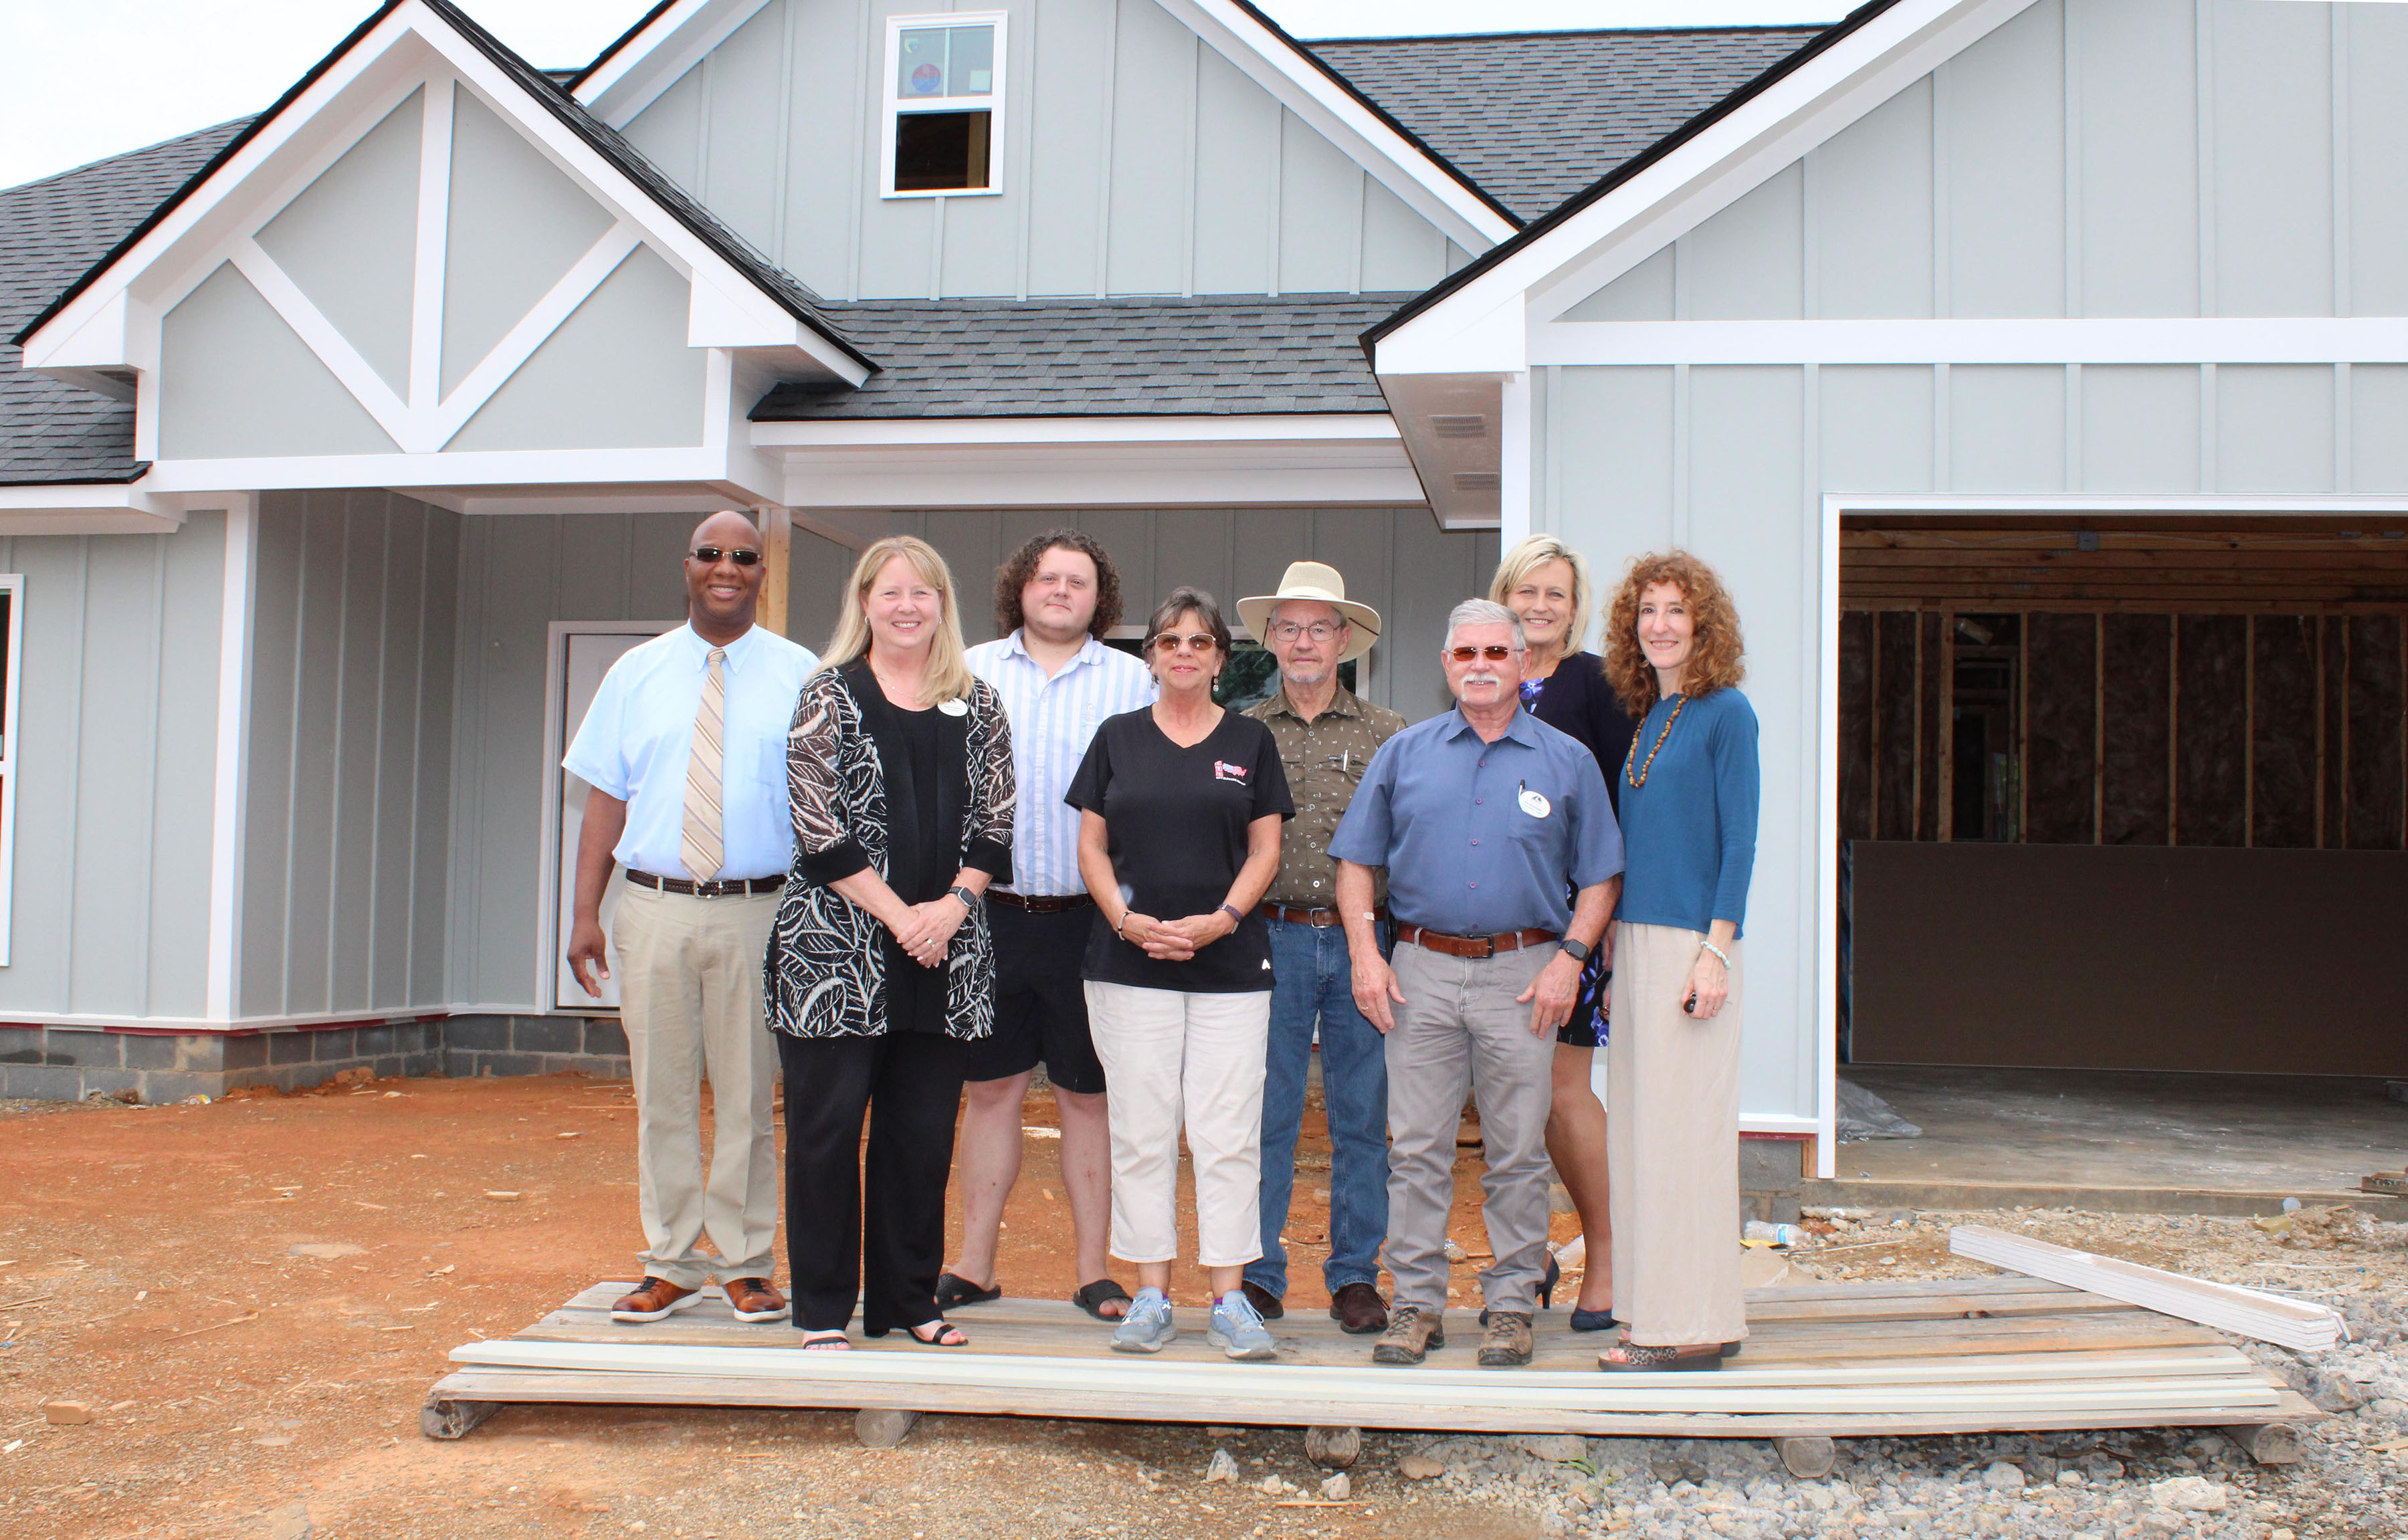 (From left, front row) Dr. Heidi Popham, GNTC president; Bonnie Thomas, City Electric Supply; Phil Burkhalter, Phillip Burkhalter Builders; and Sarah Egerer, GNTC Foundation administrator; (back row) Ethron “Carl” Crawford, Rome Home Builders Association Scholarship recipient; Grant Payne, Rome Home Builders Association Scholarship recipient; Sammy Bartley, Sammy Bartley Properties; and Connie Mathis, chief financial officer of River City Bank and executive officer of the Rome Home Builders Association. 